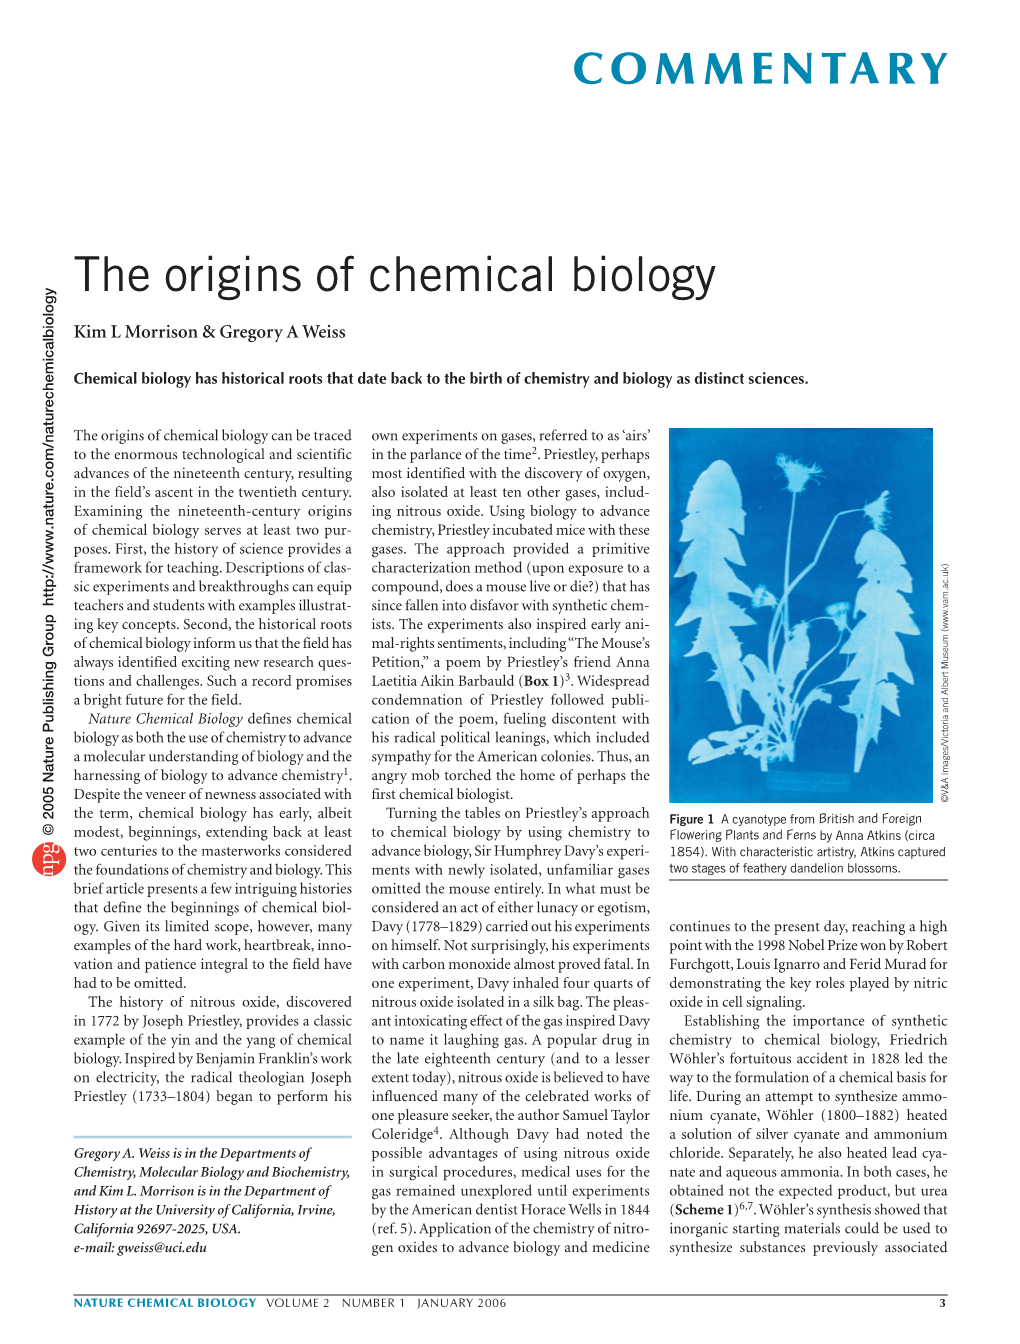 The Origins of Chemical Biology